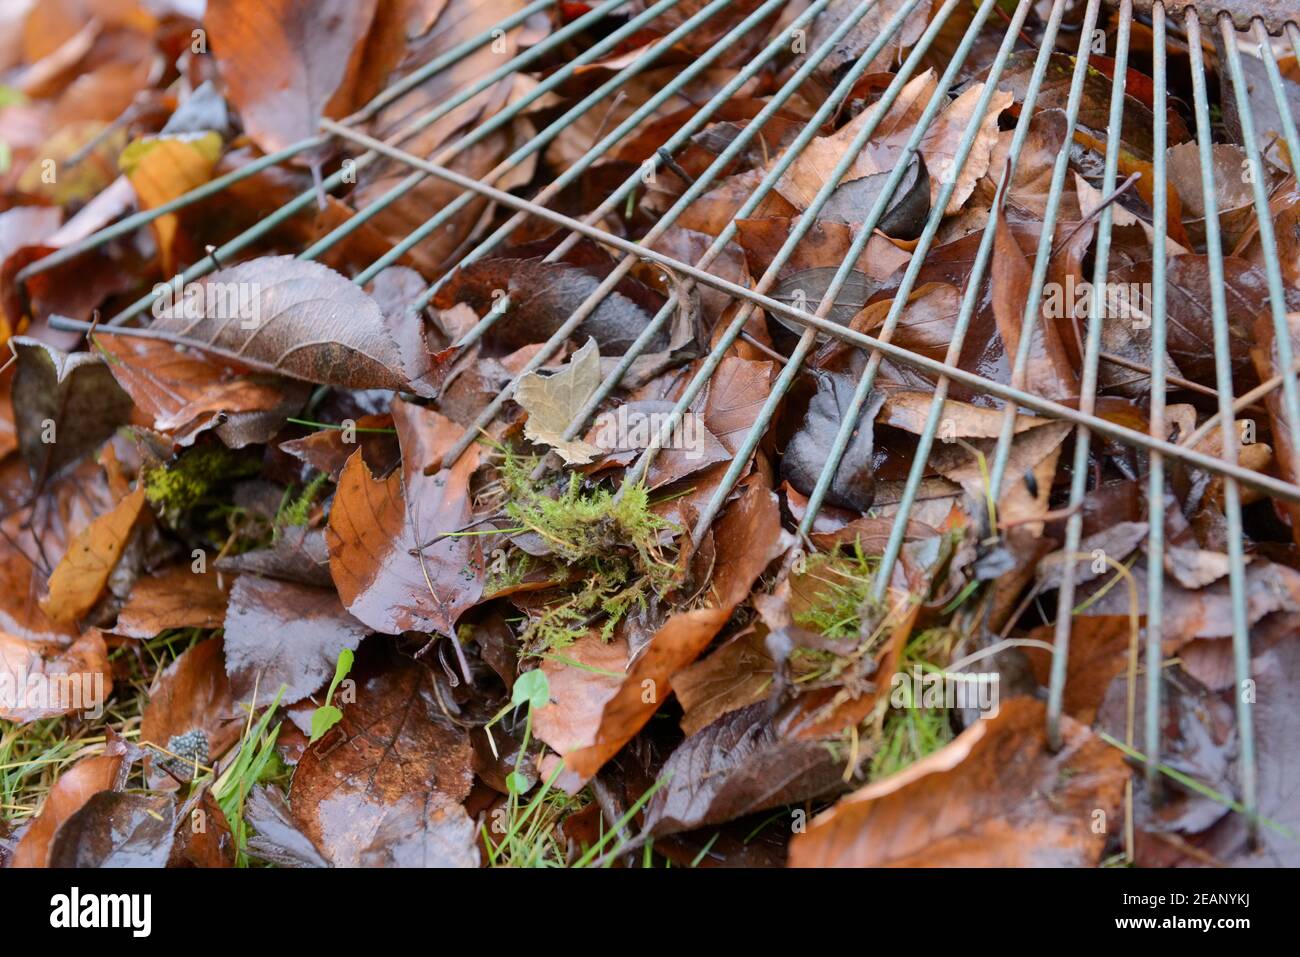 Close up of the head and tines of a garden rake sweeping brown leaves Stock Photo